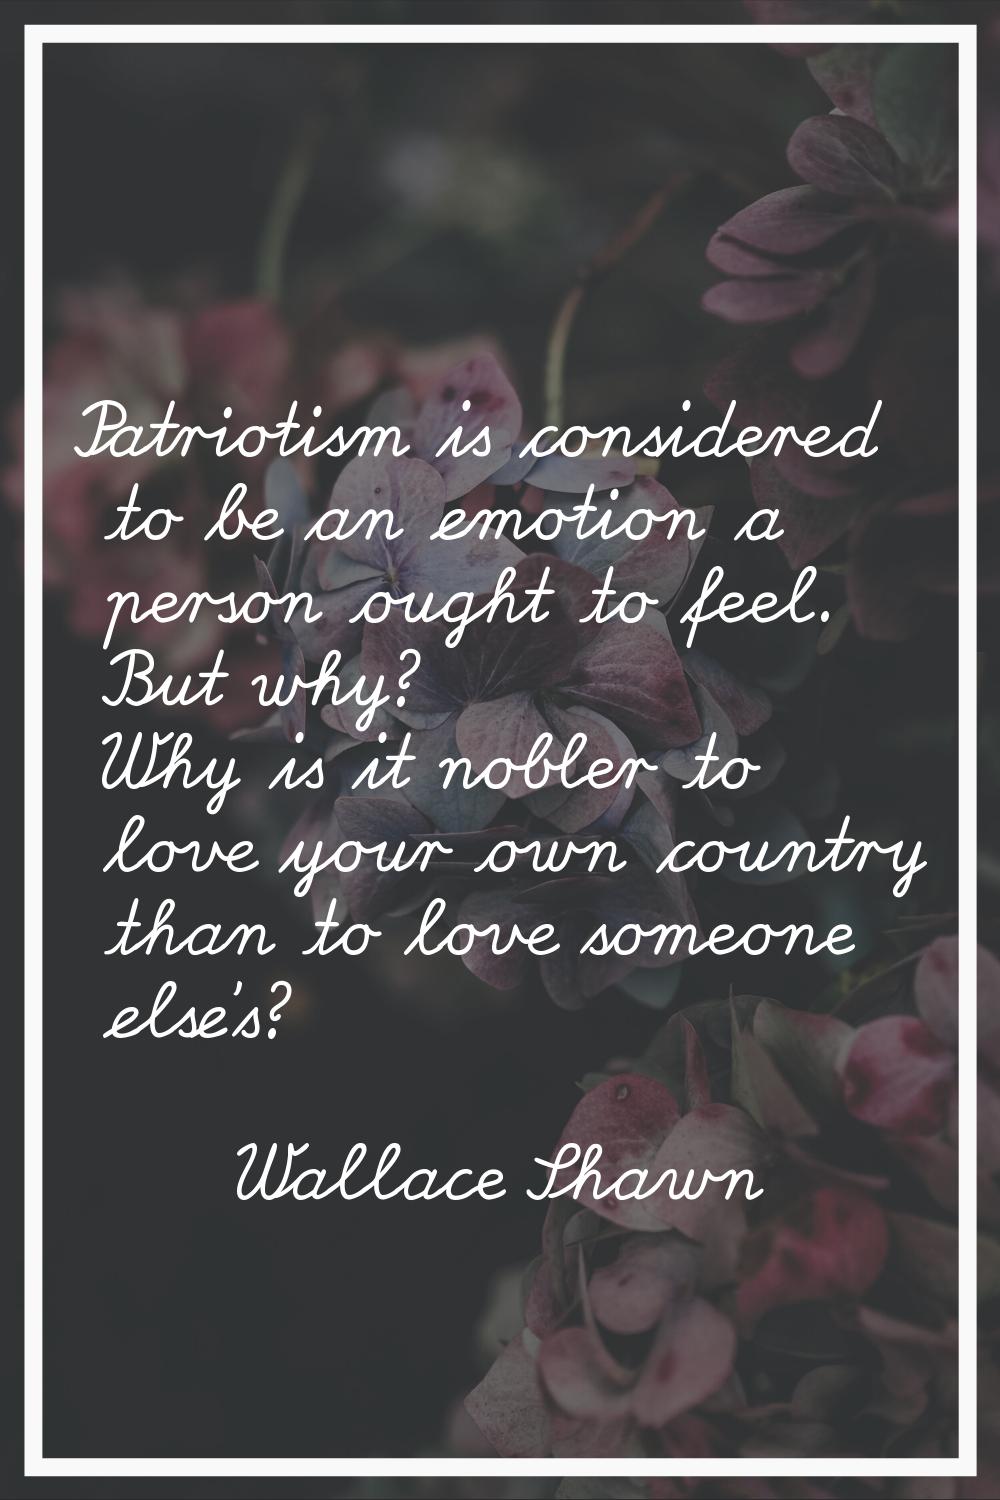 Patriotism is considered to be an emotion a person ought to feel. But why? Why is it nobler to love